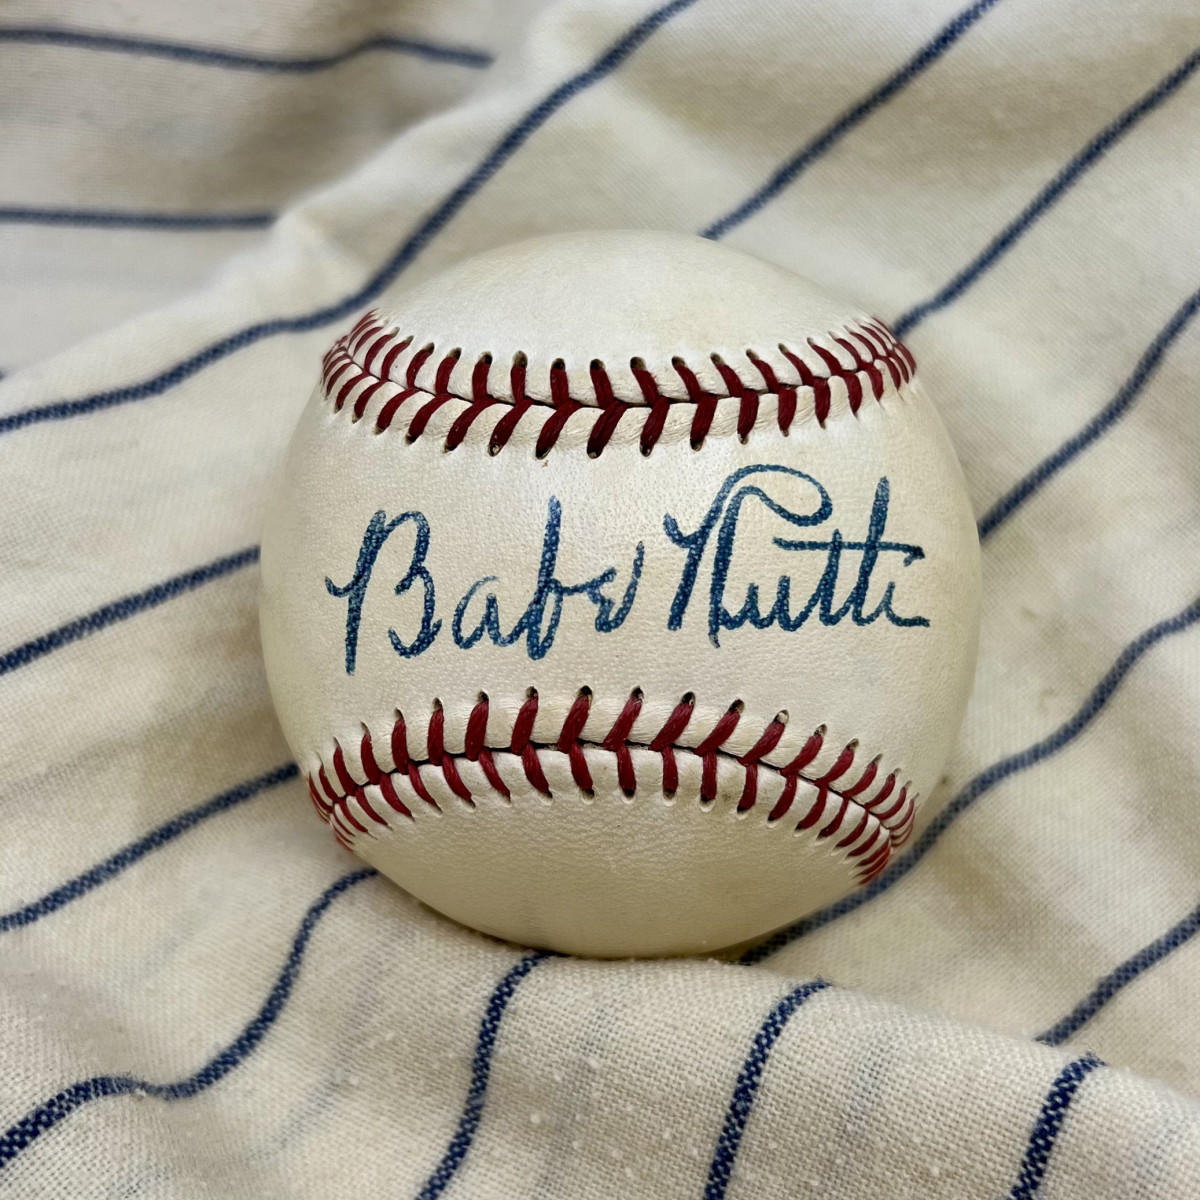 Babe Ruth-signed ball up for auction at Grey Flannel Auctions.